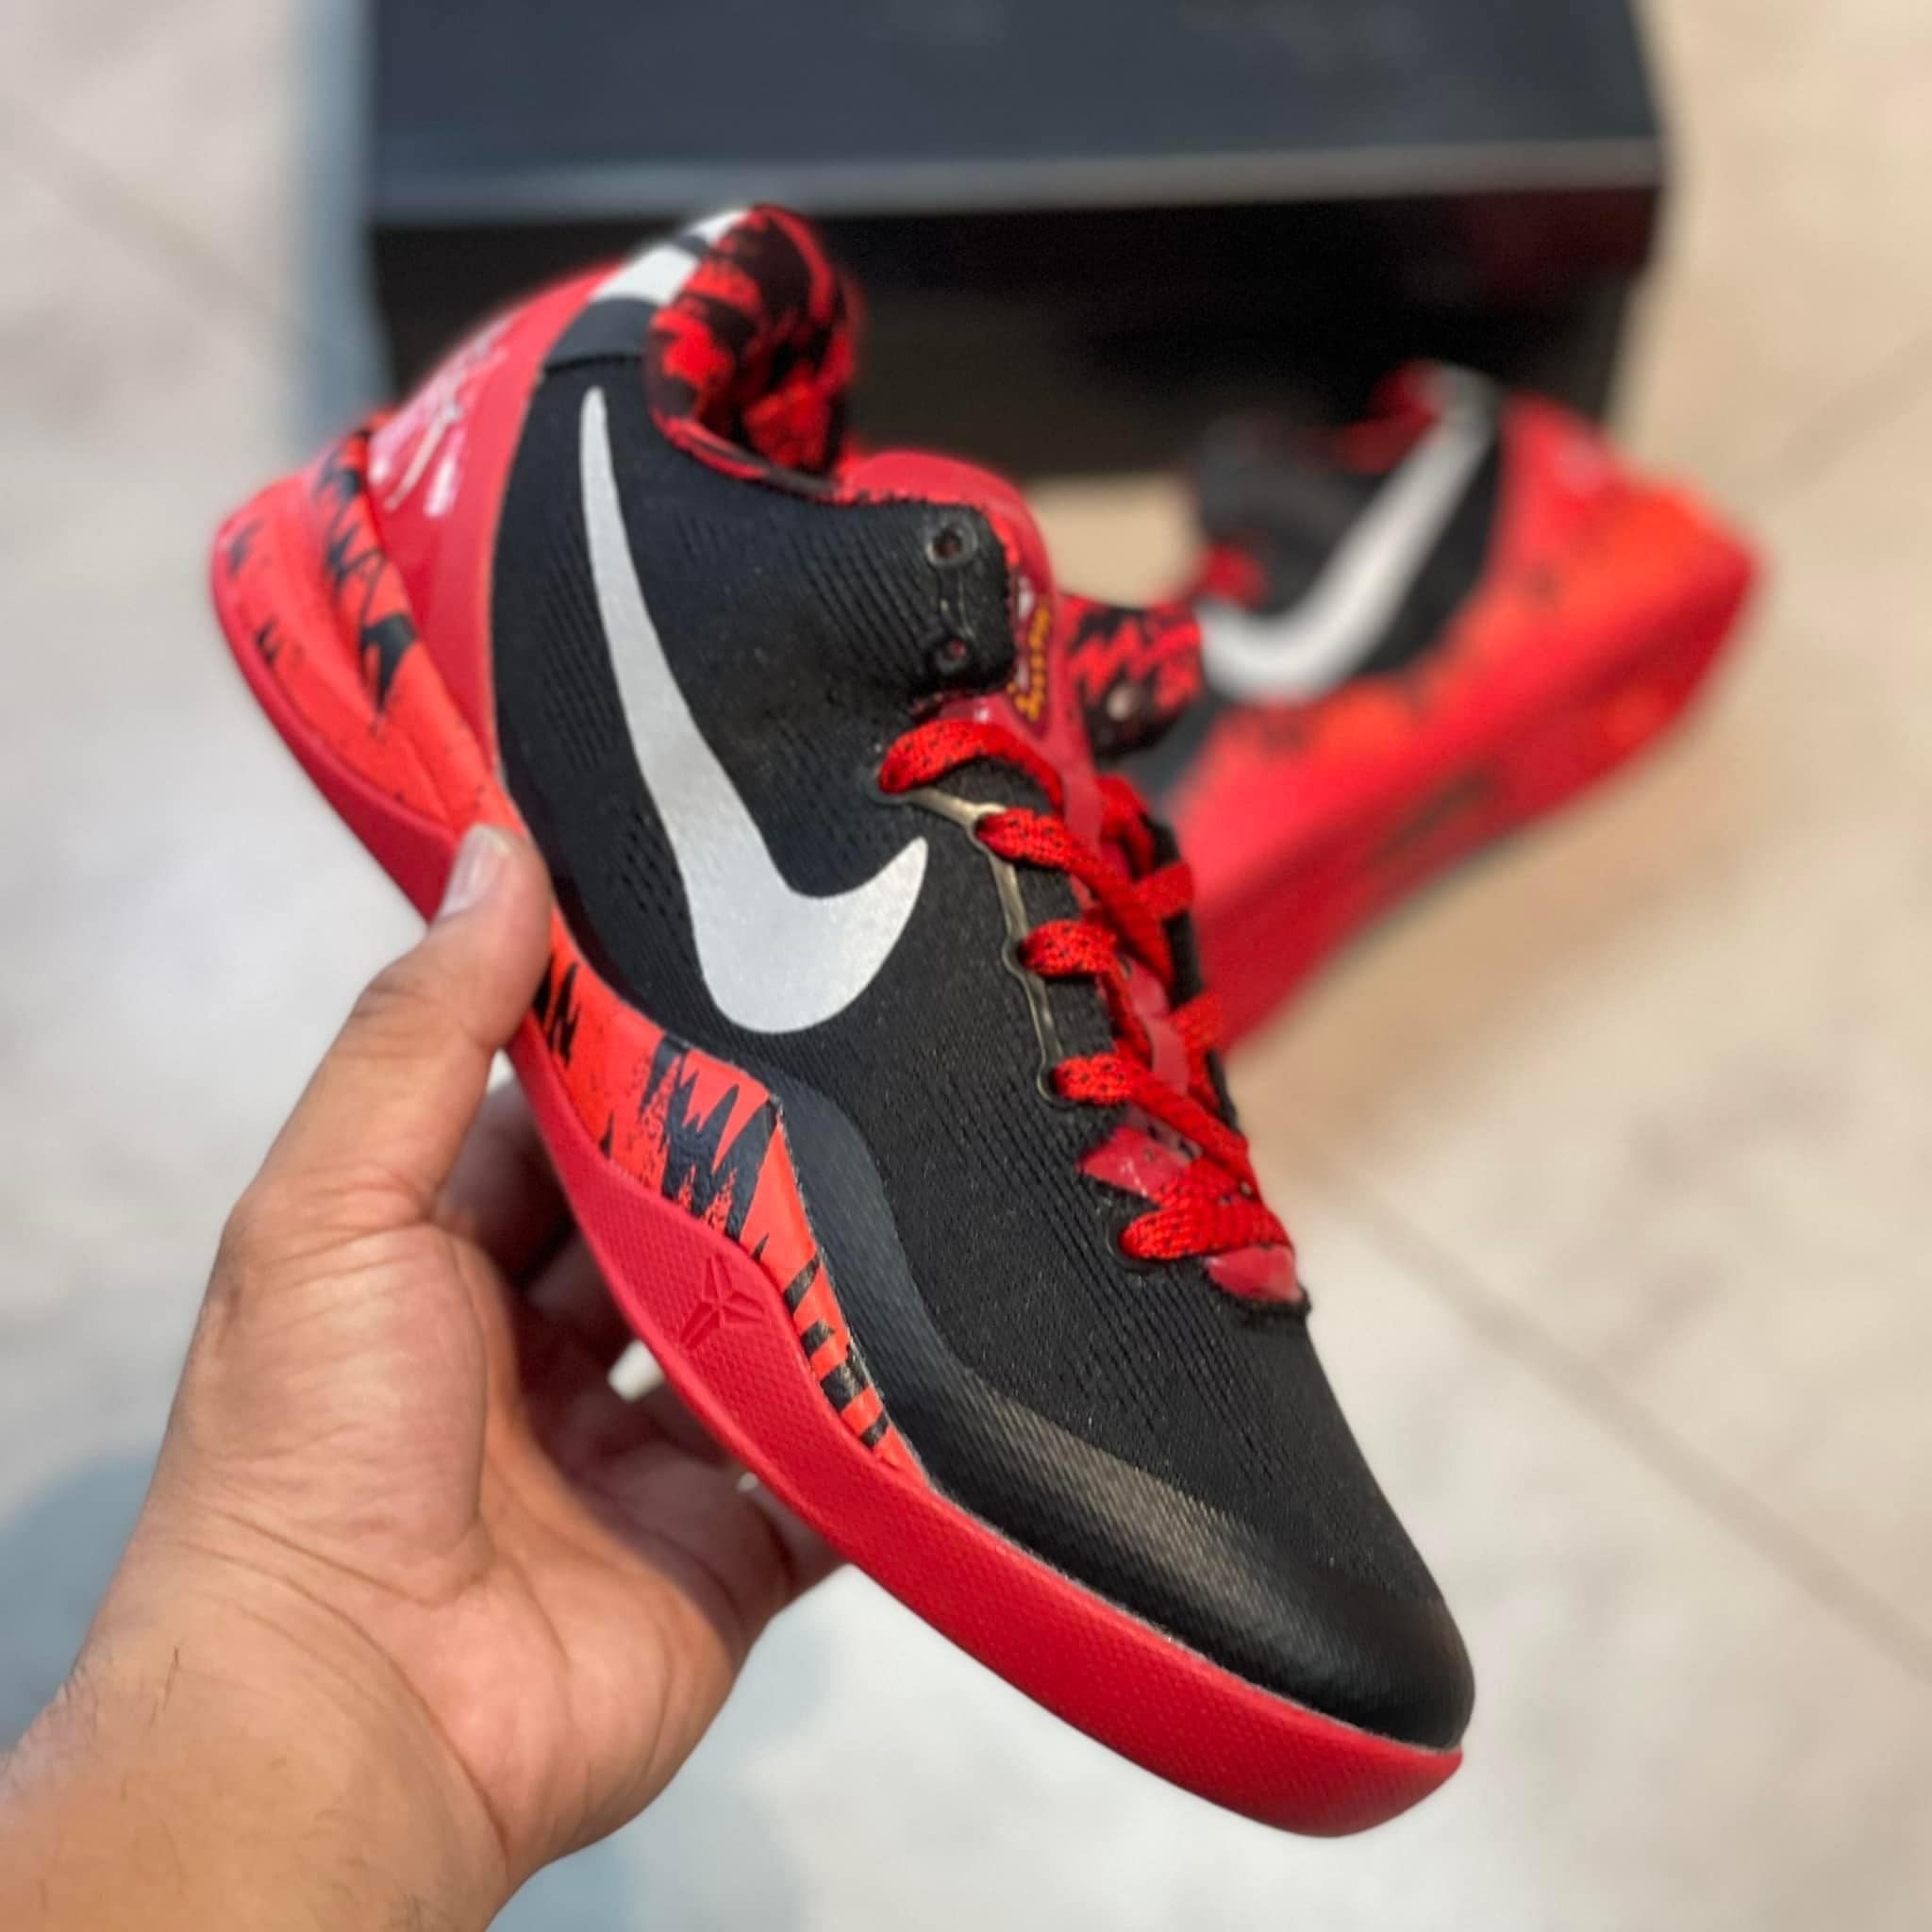 Kobe 8 Red Black Colorway Sports Basketball Shoes For Men High Quality Oem  | Lazada Ph